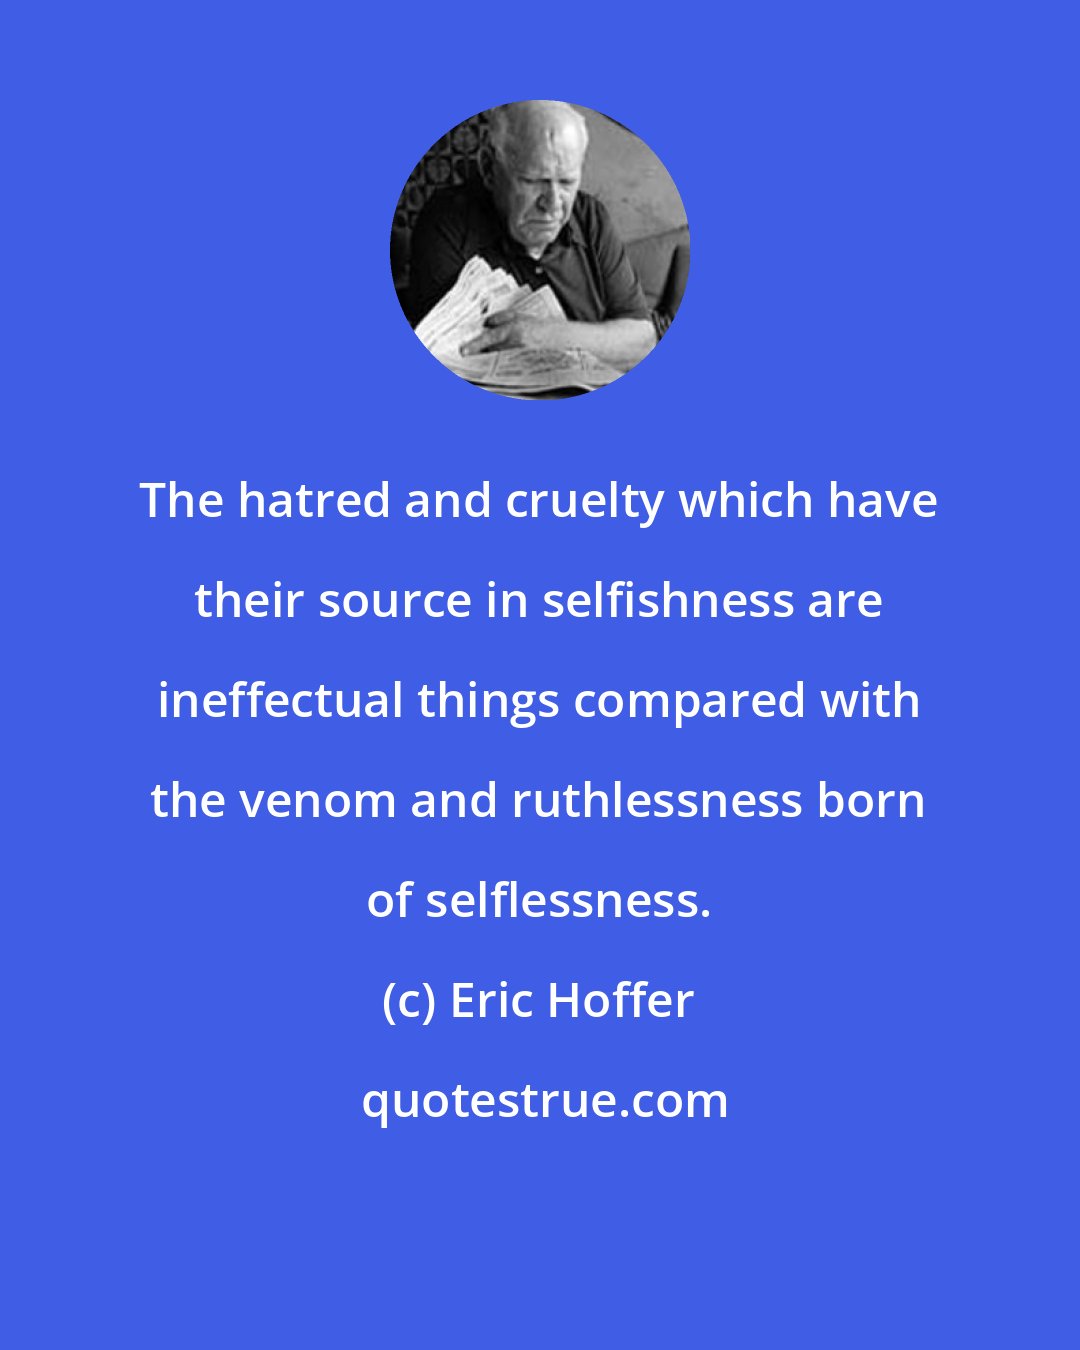 Eric Hoffer: The hatred and cruelty which have their source in selfishness are ineffectual things compared with the venom and ruthlessness born of selflessness.